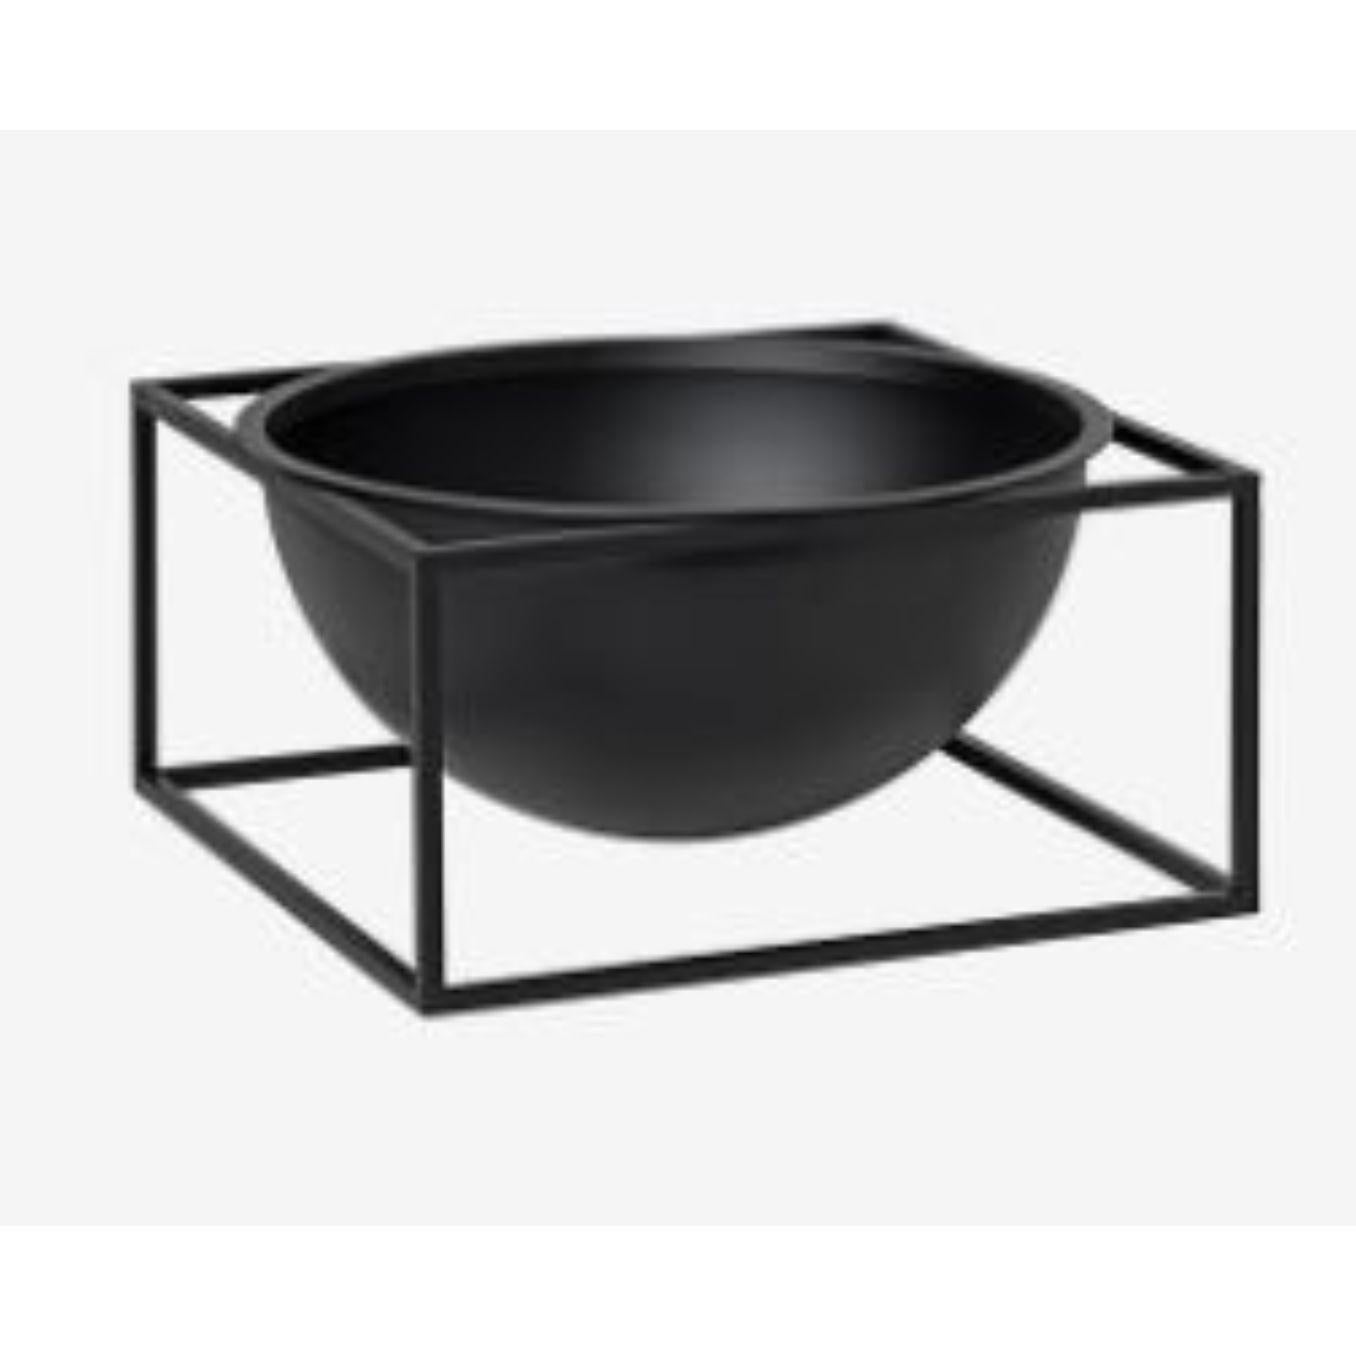 Black large centerpiece Kubus bowl by Lassen
Dimensions: D 23 x W 23 x H 11.50 cm 
Materials: metal 
Weight: 3 Kg

The dictionary definition is “an object occupying a central, especially an adornment in the center of a table” and the Kubus